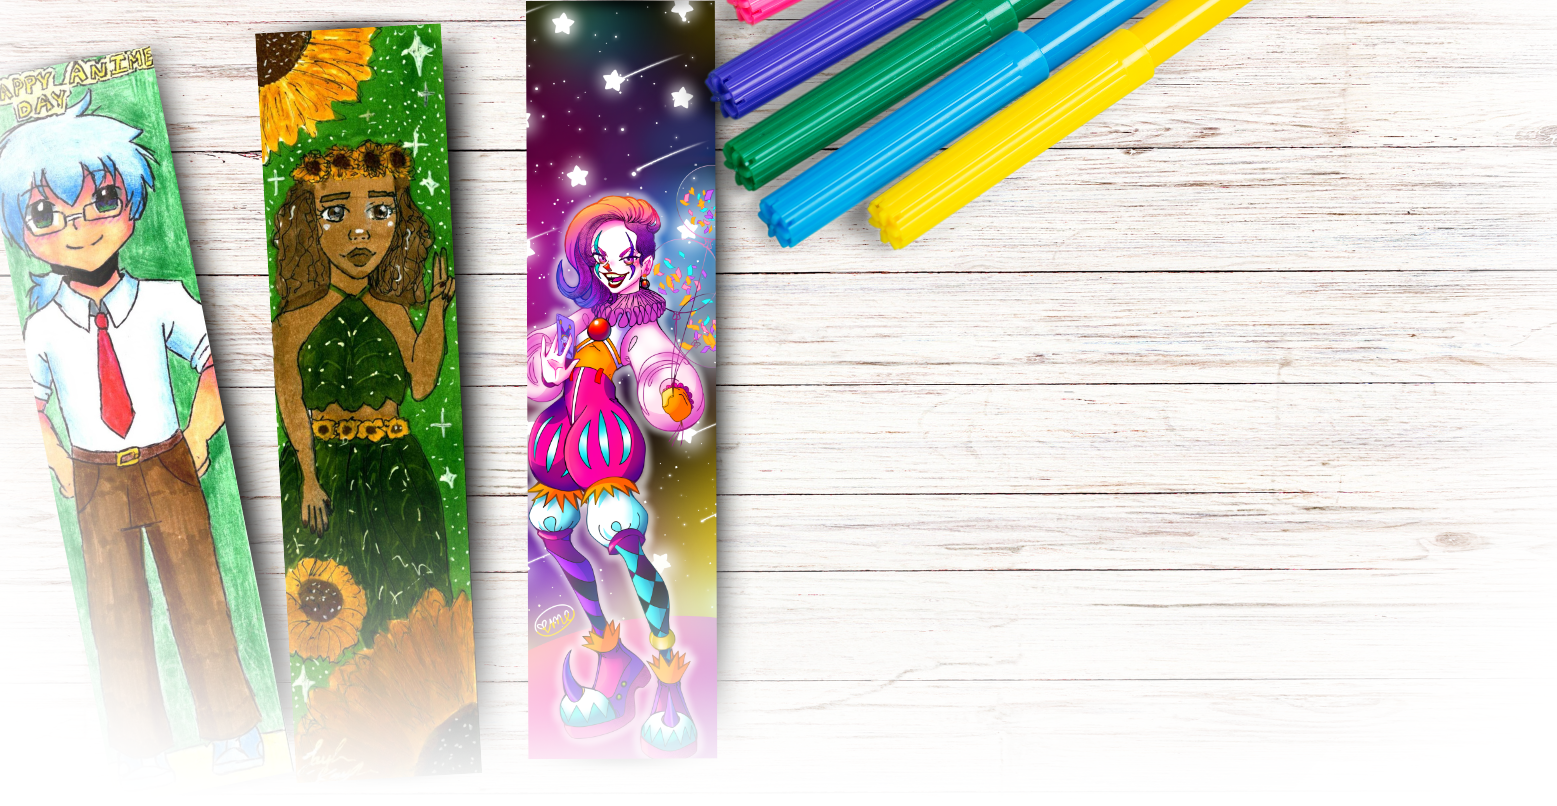 A depiction of three bookmarks with custom drawn images of anime themed characters as an example of what the contest is about.